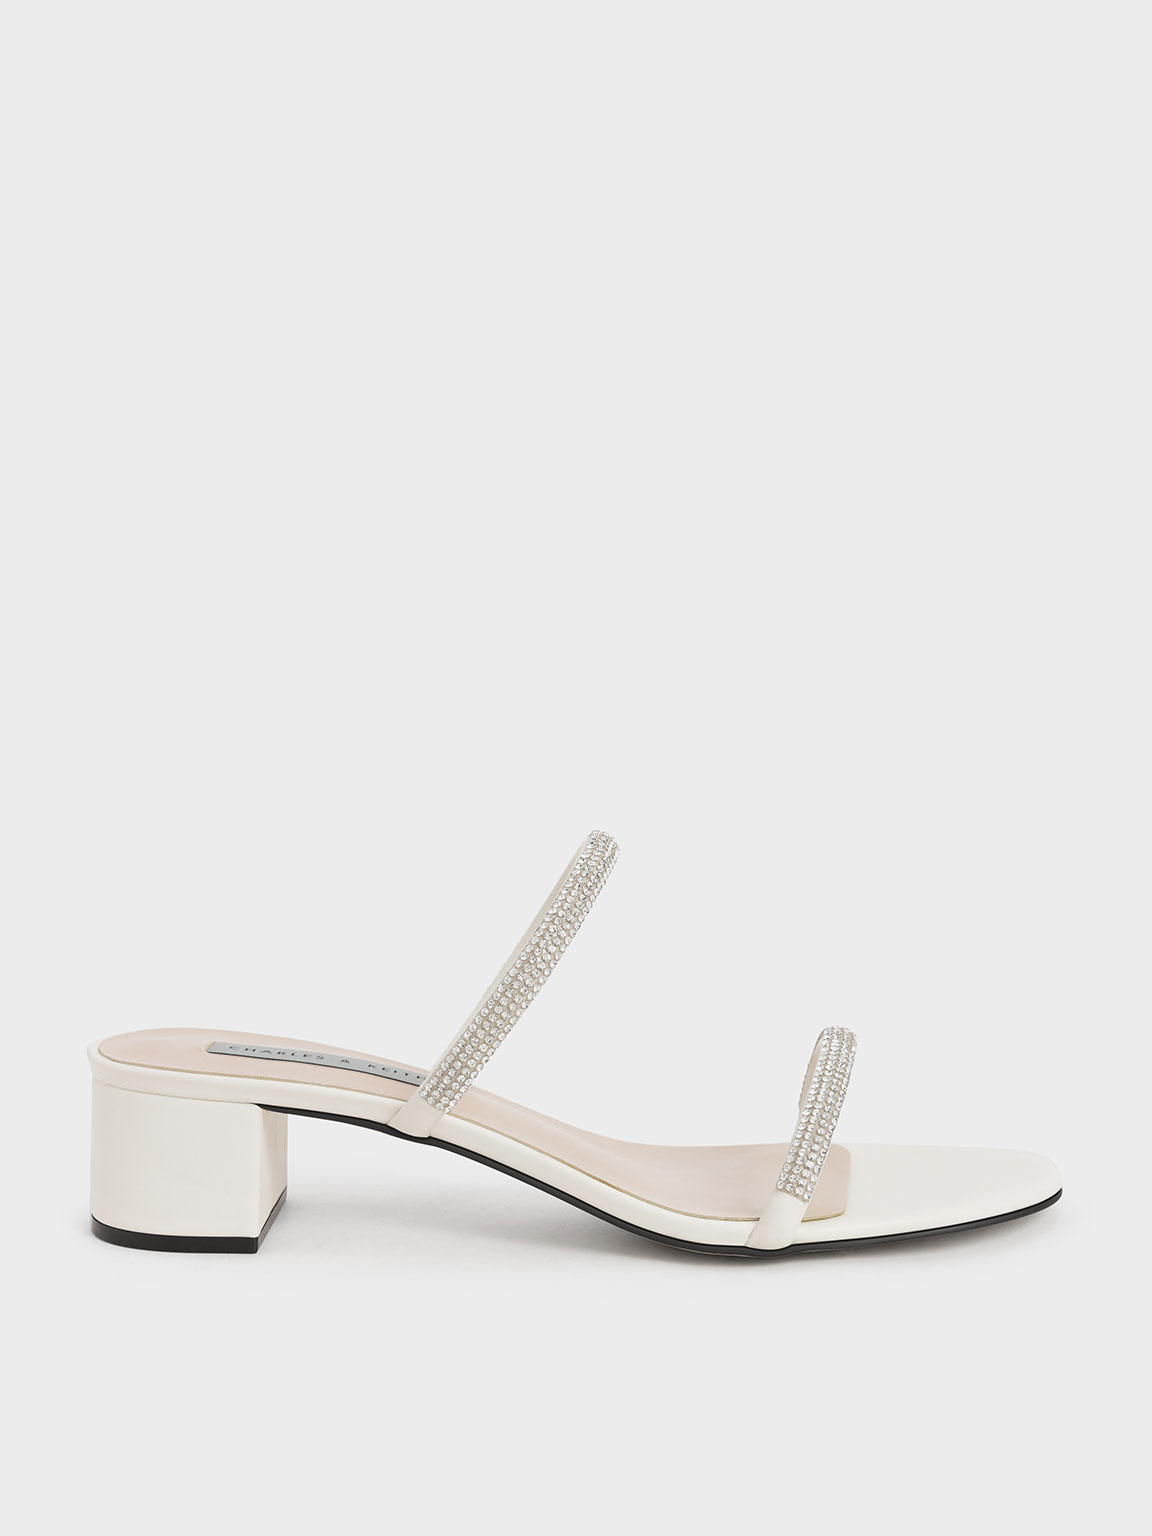 Cream Gem-Encrusted Strappy Heeled Mules - CHARLES & KEITH US